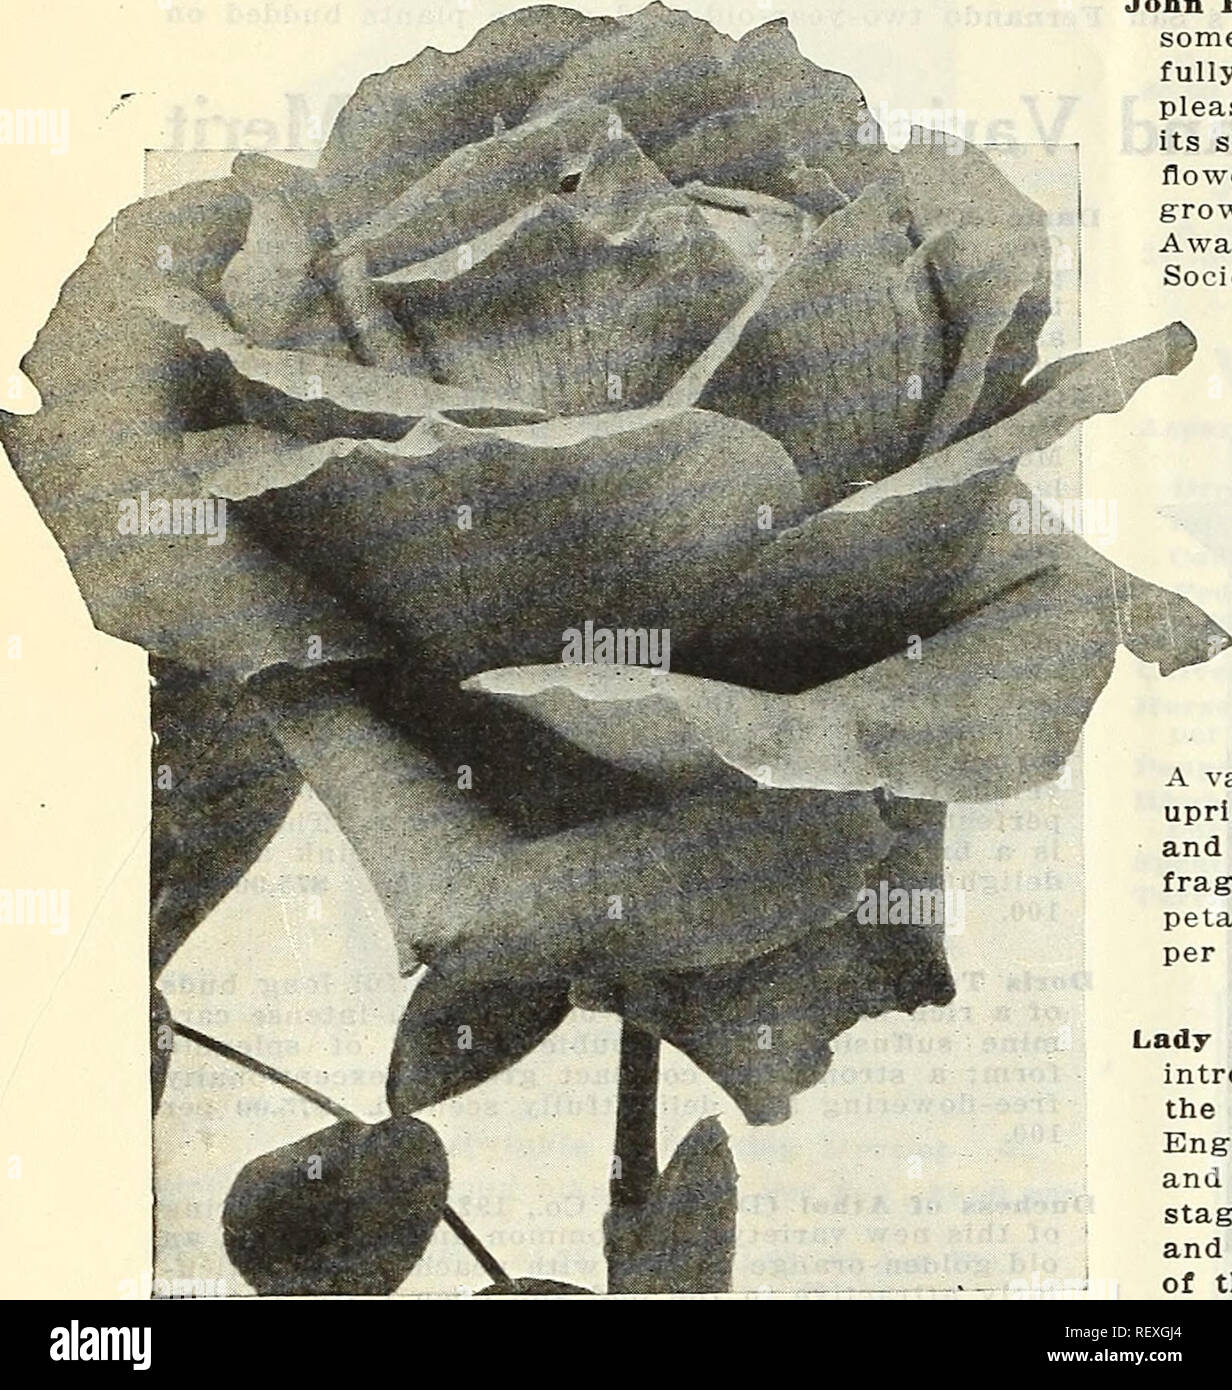 . Dreer's wholesale price list : bulbs for florists plants for florists flower seeds for florists. Bulbs (Plants) Catalogs; Flowers Seeds Catalogs; Vegetables Seeds Catalogs; Nurseries (Horticulture) Catalogs; Gardening Equipment and supplies Catalogs. 34 HENRY A. DREER Roses WHOLESALE LIST New Hybrid-Tea Roses and Varieties of Special Merit Dormant Stock for Delivery Winter of 1928-1929. 'Sew Hybrid-Tea Rose, John Rnssell Irish Courage (McGredy, 1927). A splendid addition to the list of bi-colored Roses, the color being a soft shrimp-pink merging to salmon in the fully ex- panded petals, the  Stock Photo